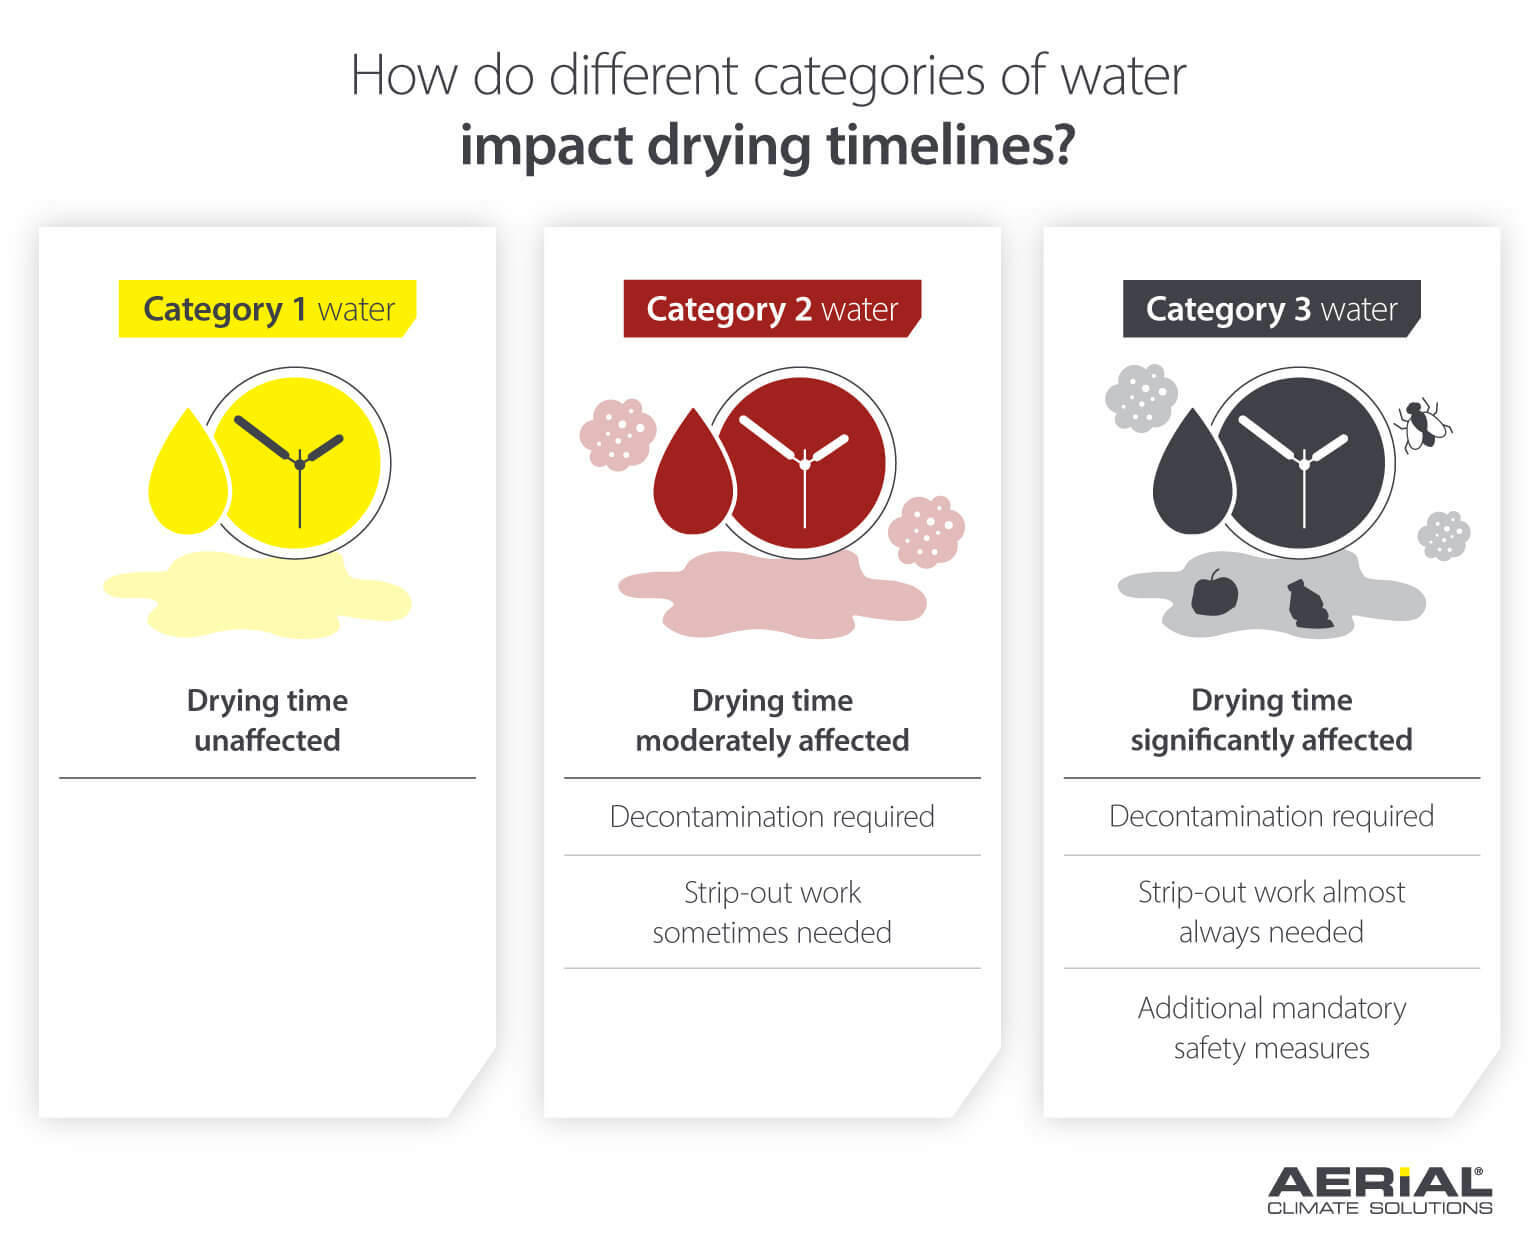 An Infographic on 3 categories of water and how they impact drying times including: Category 1 (clean water source), Category 2 (greywater), and Category 3 (blackwater)